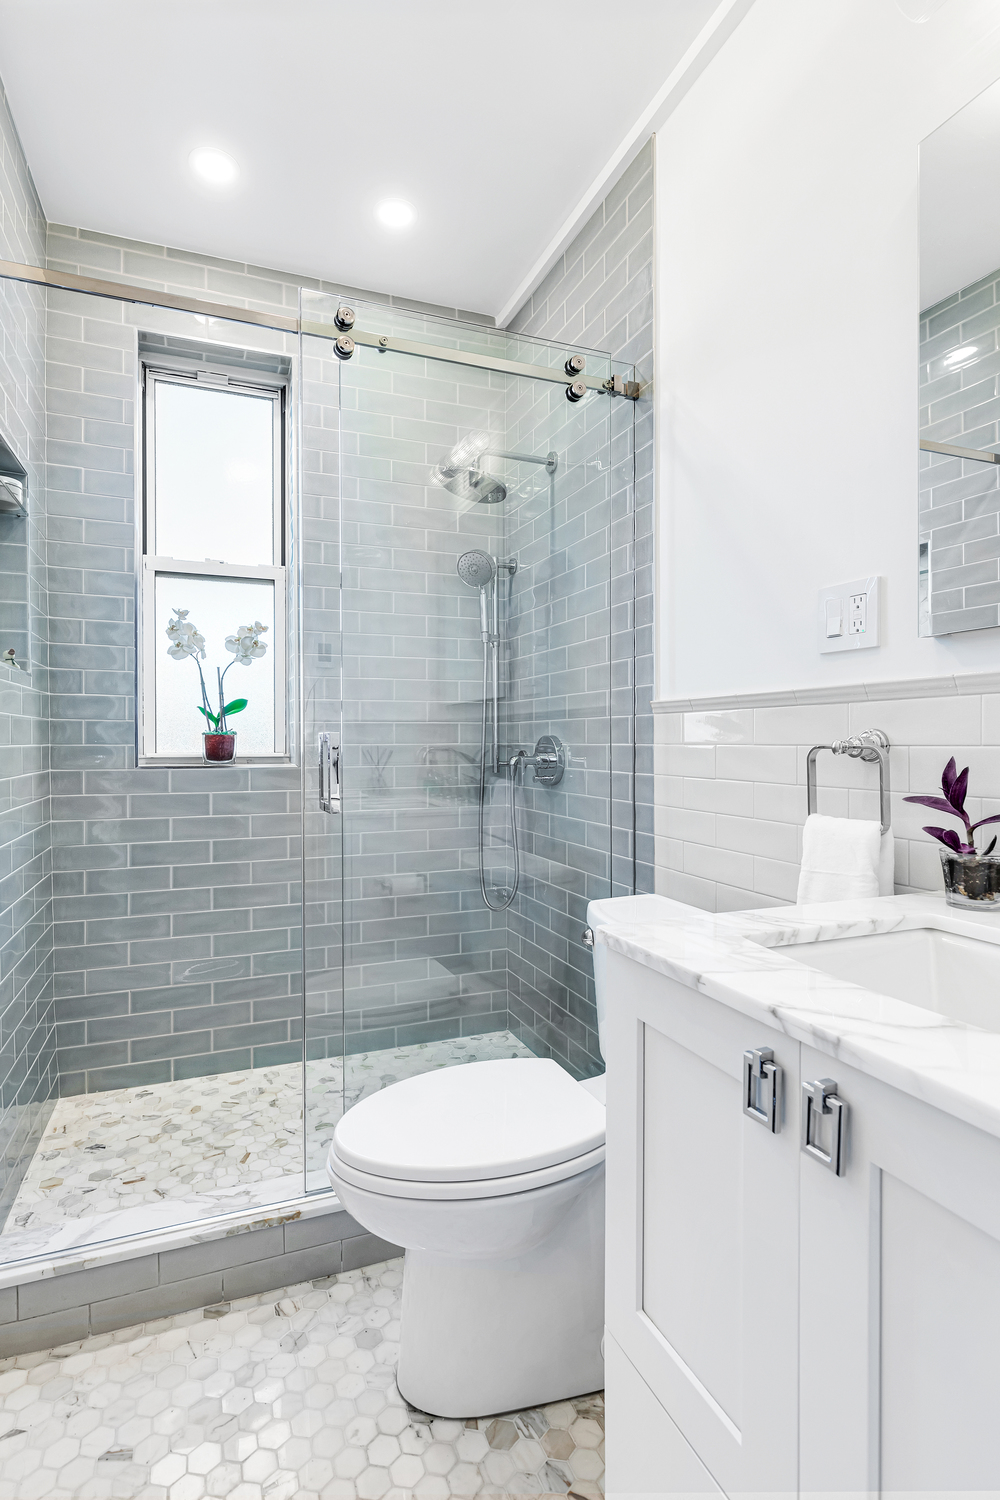 Remodeled bathroom with glass shower and white vanity